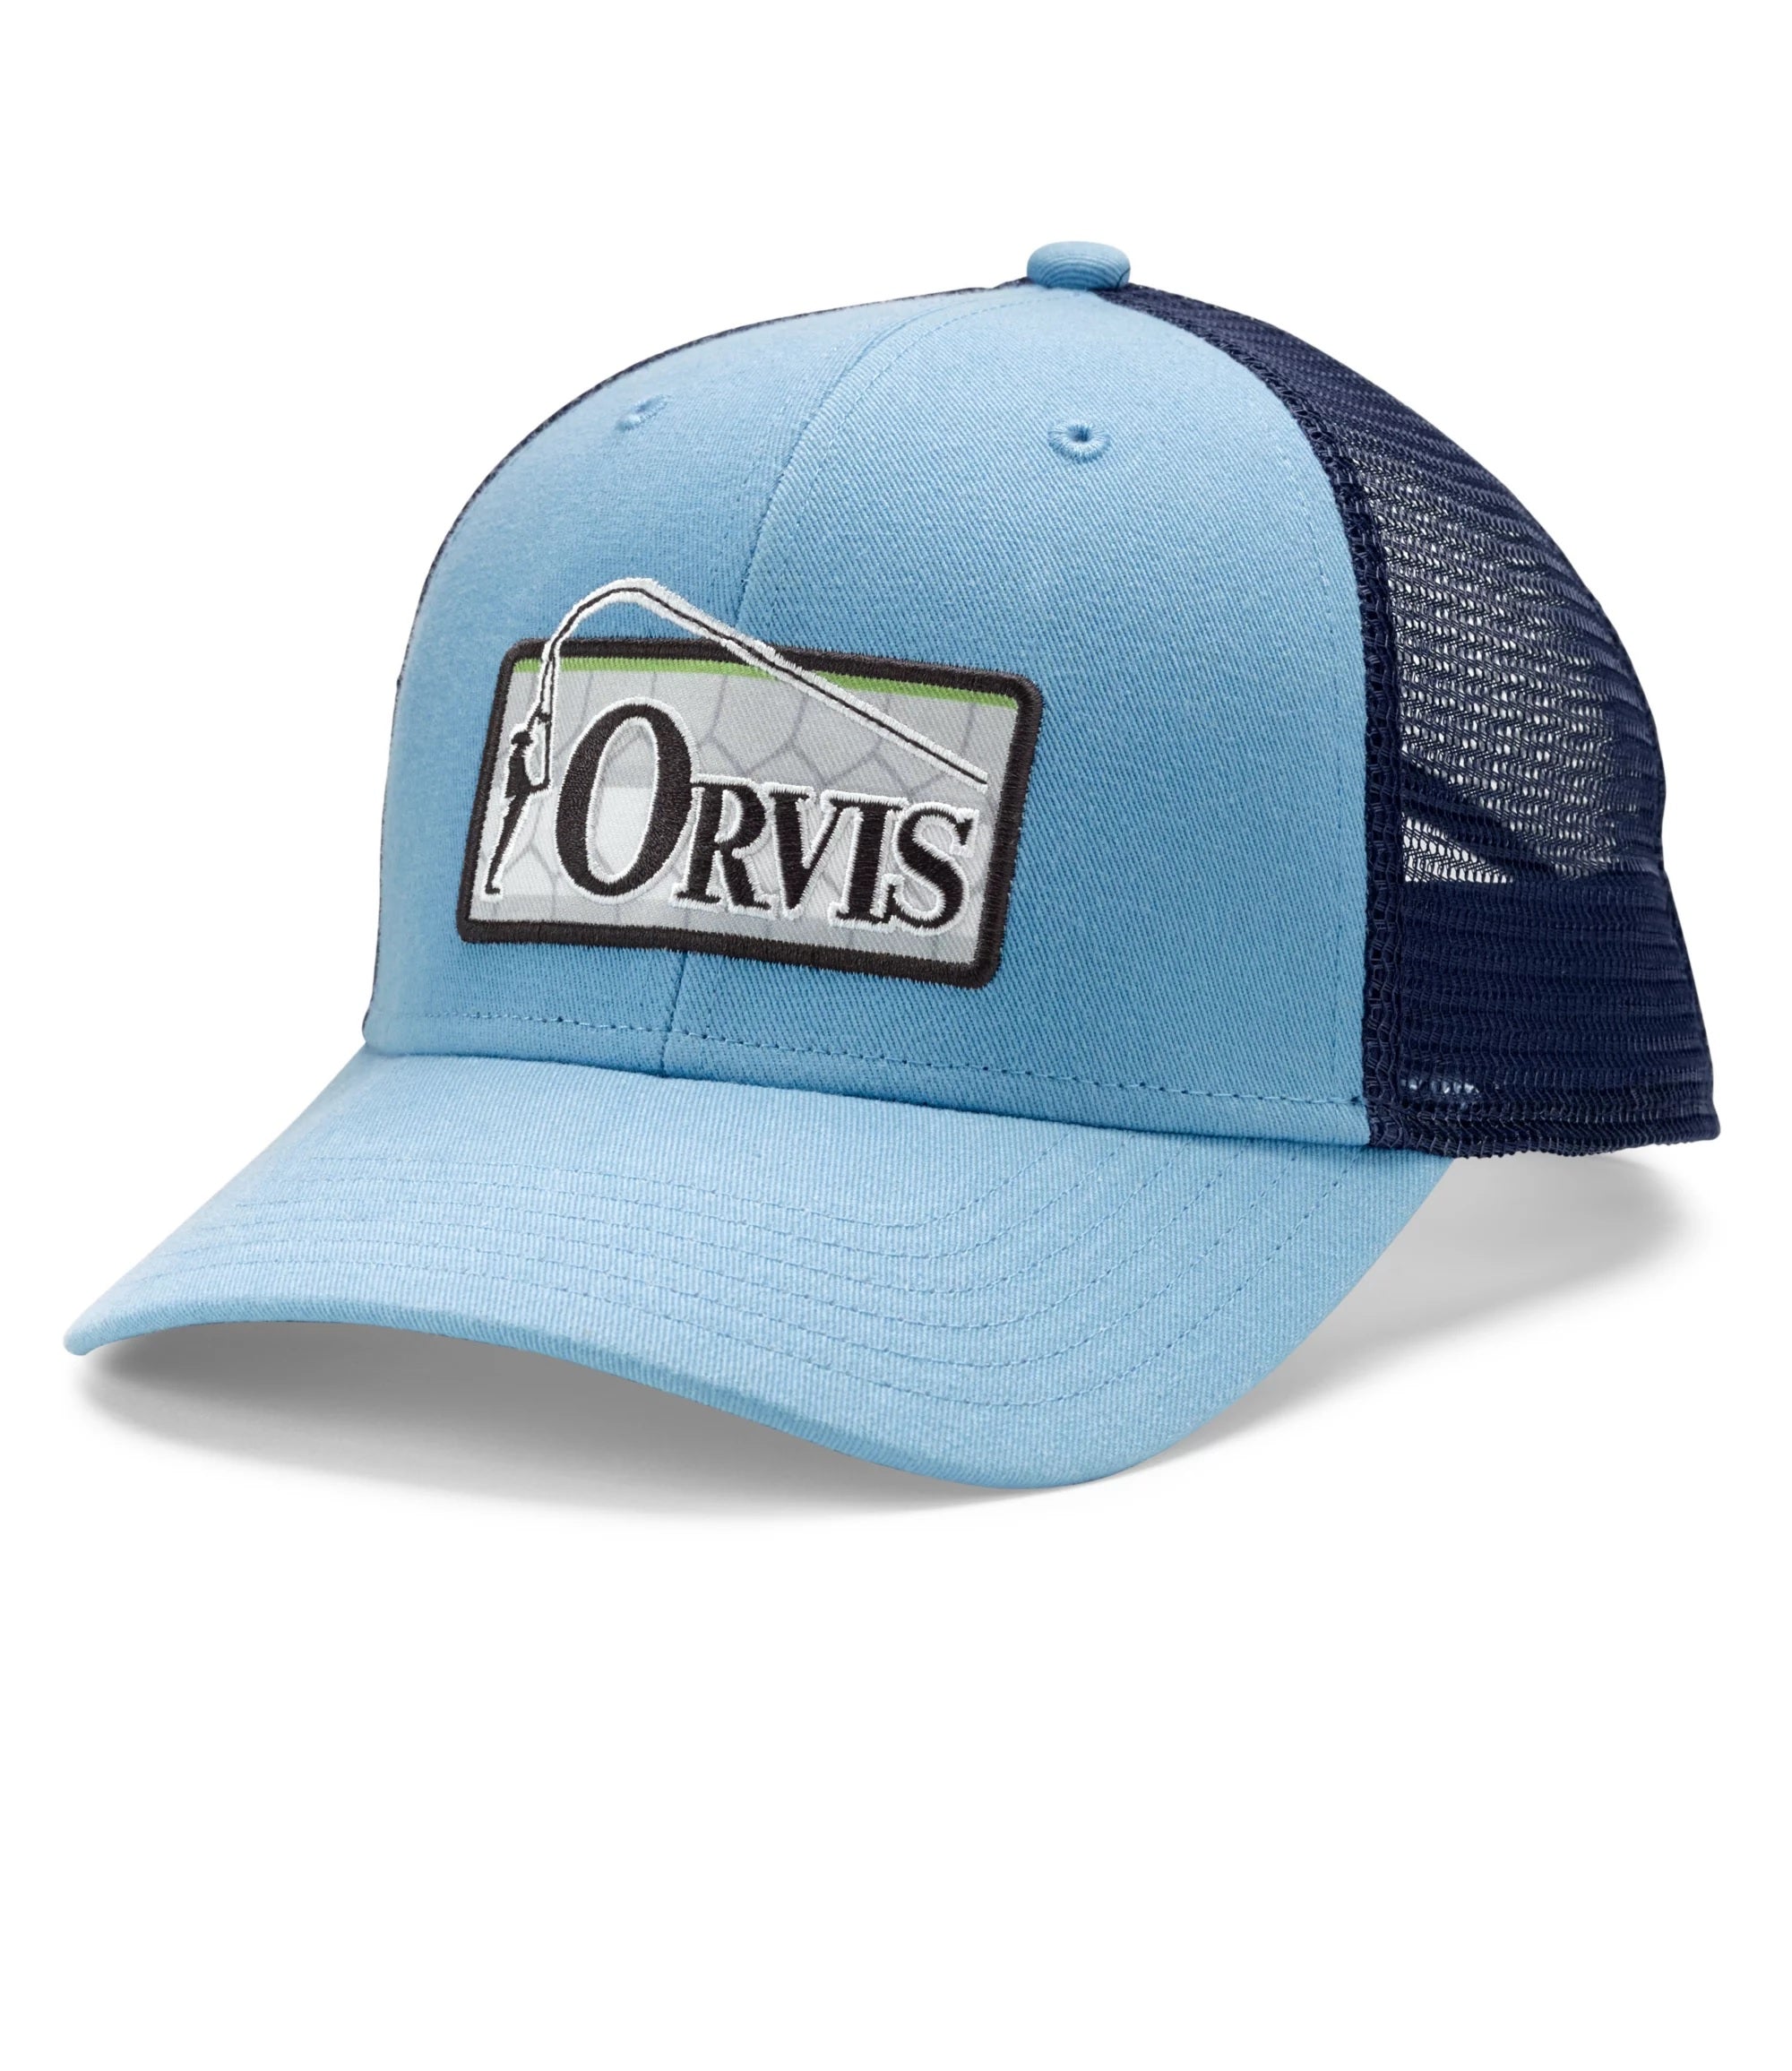 Bent Rod Badge Tee | Fishing Clothes | Orvis UK Pine / Small